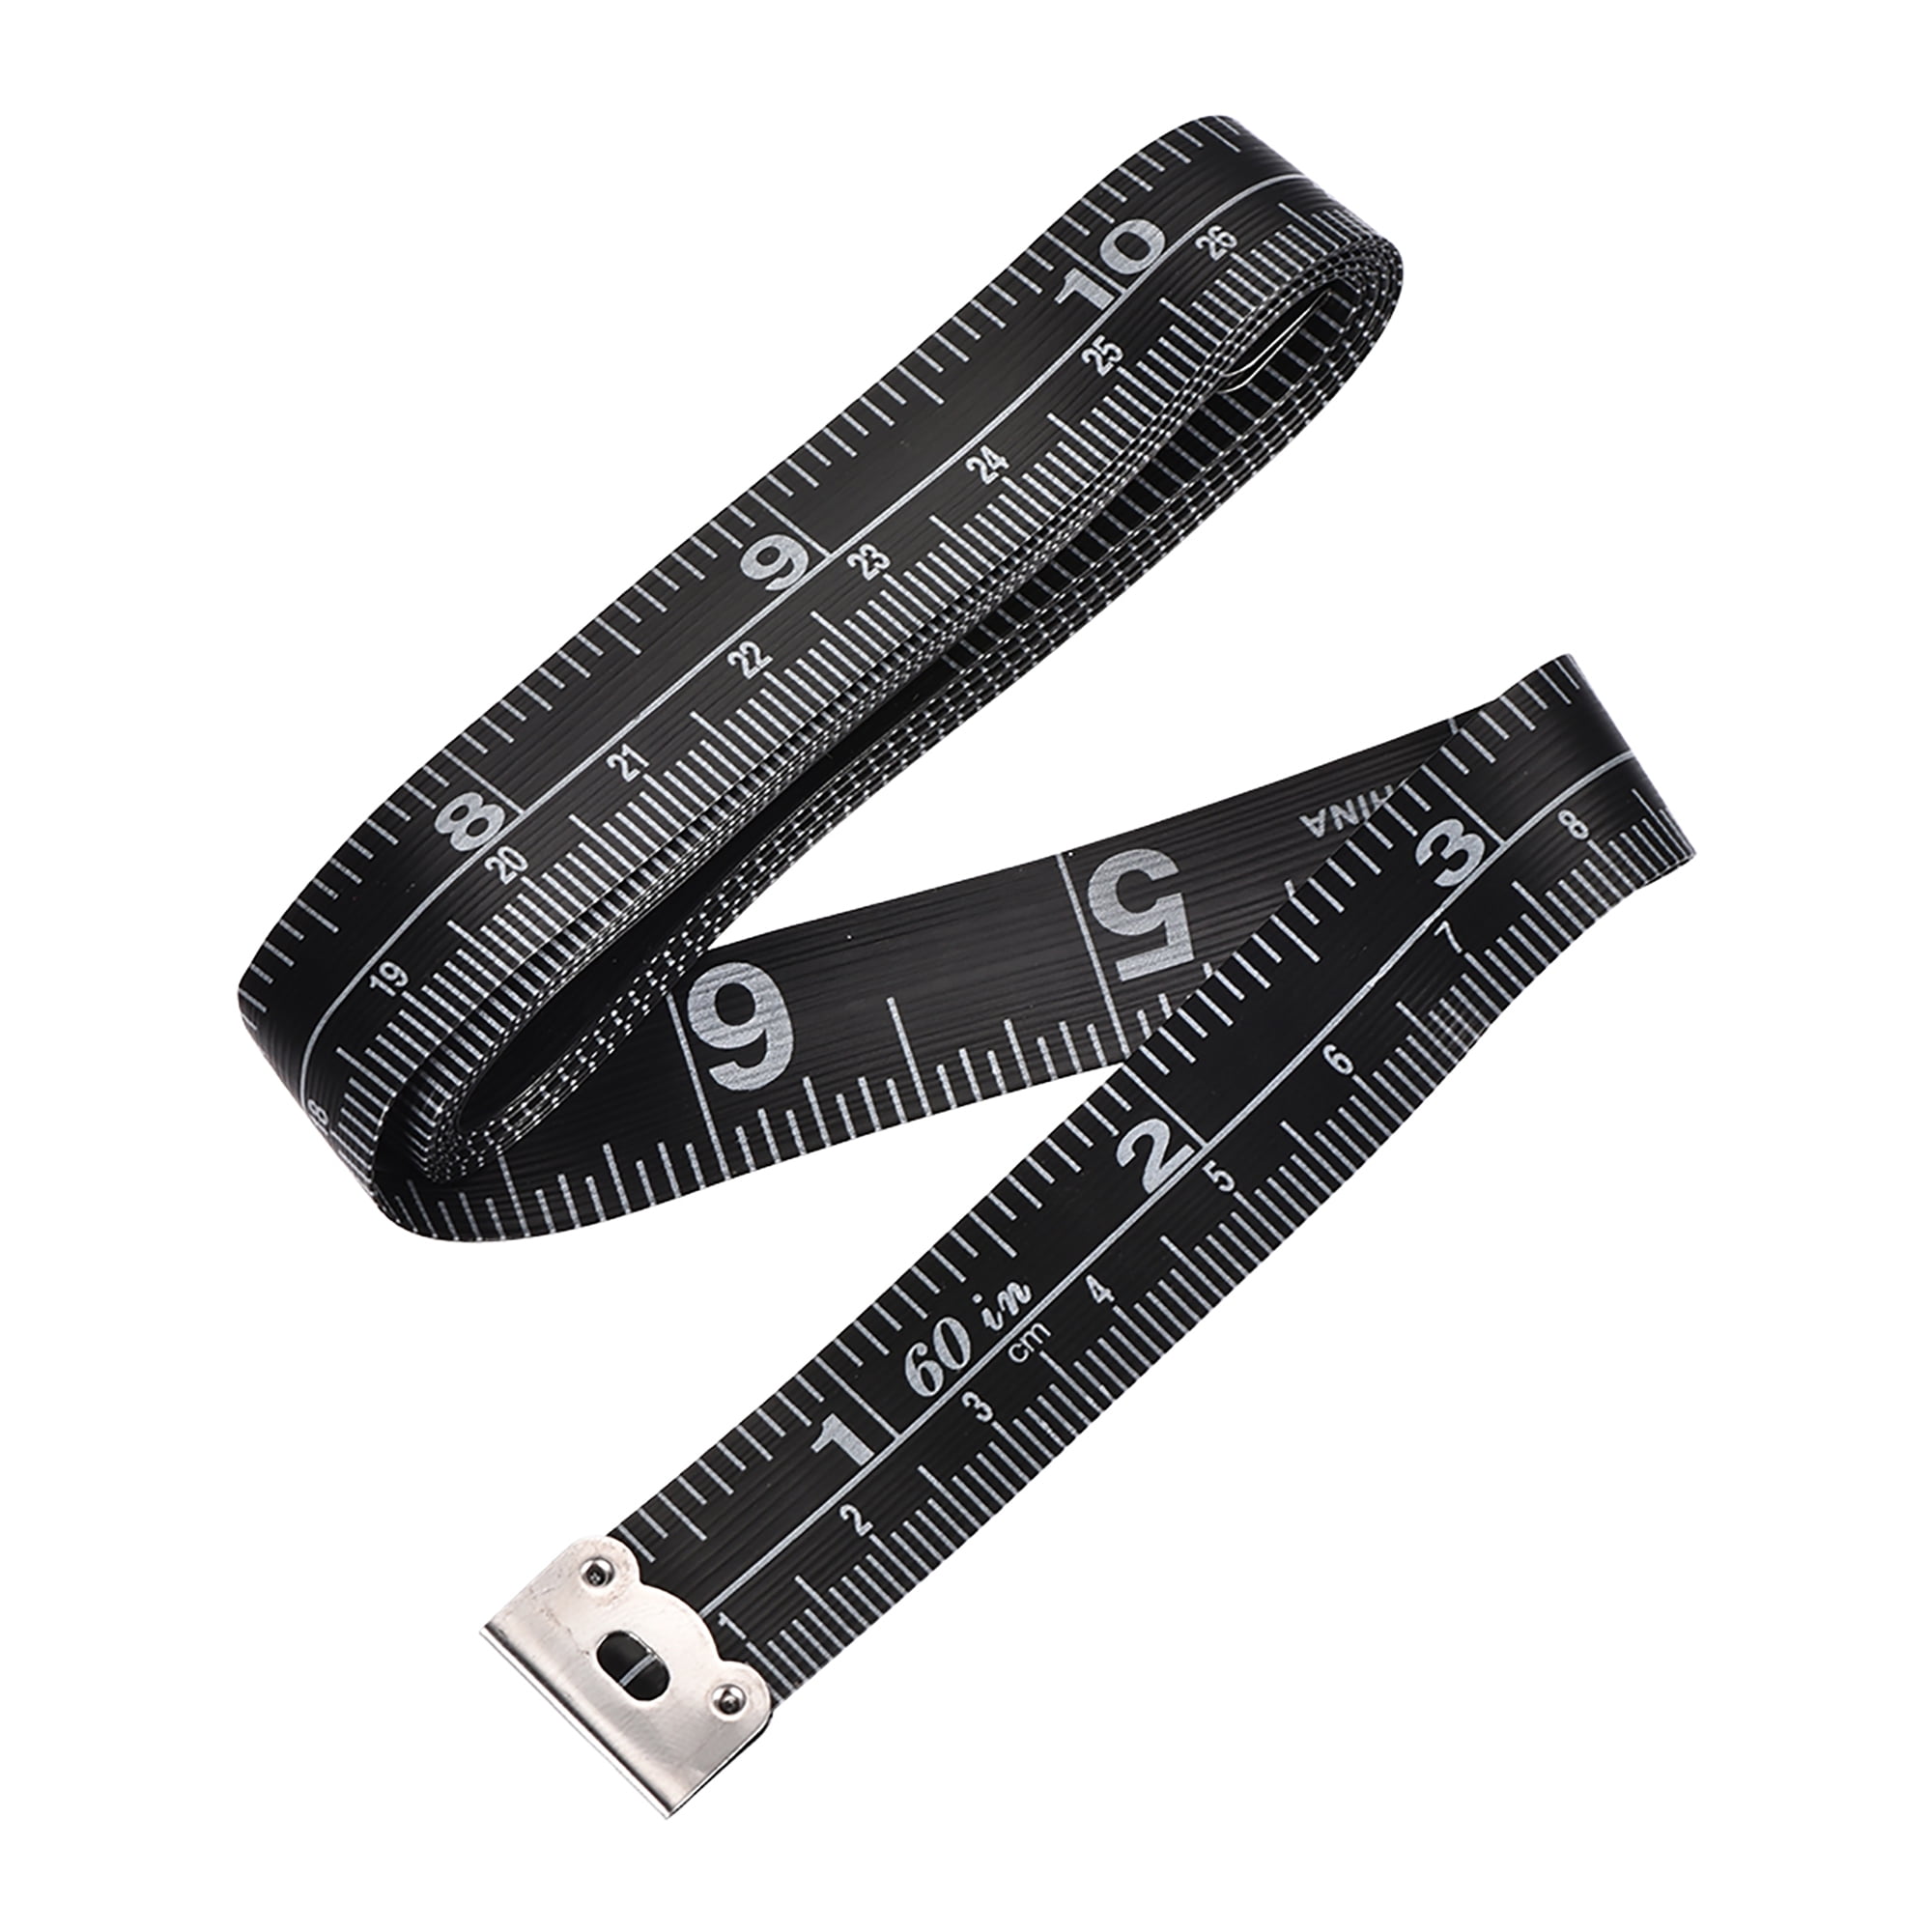 150cm/60in Double-sided Measuring Tape with a Snap Button Sewing